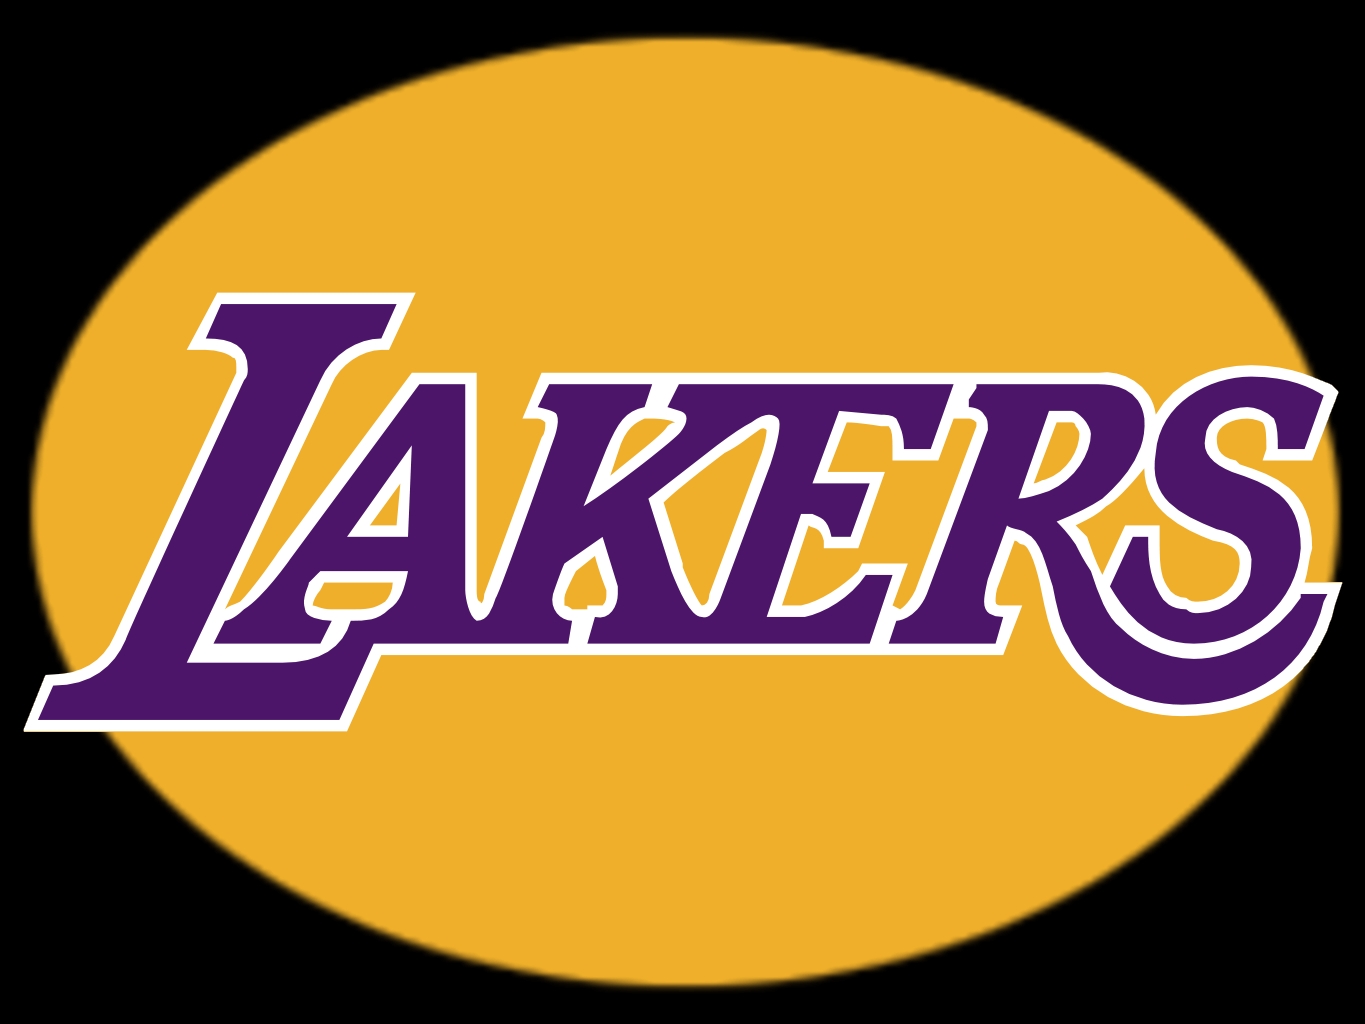 World Sports Hd Wallpapers: Los Angeles Lakers Hd Wallpapers